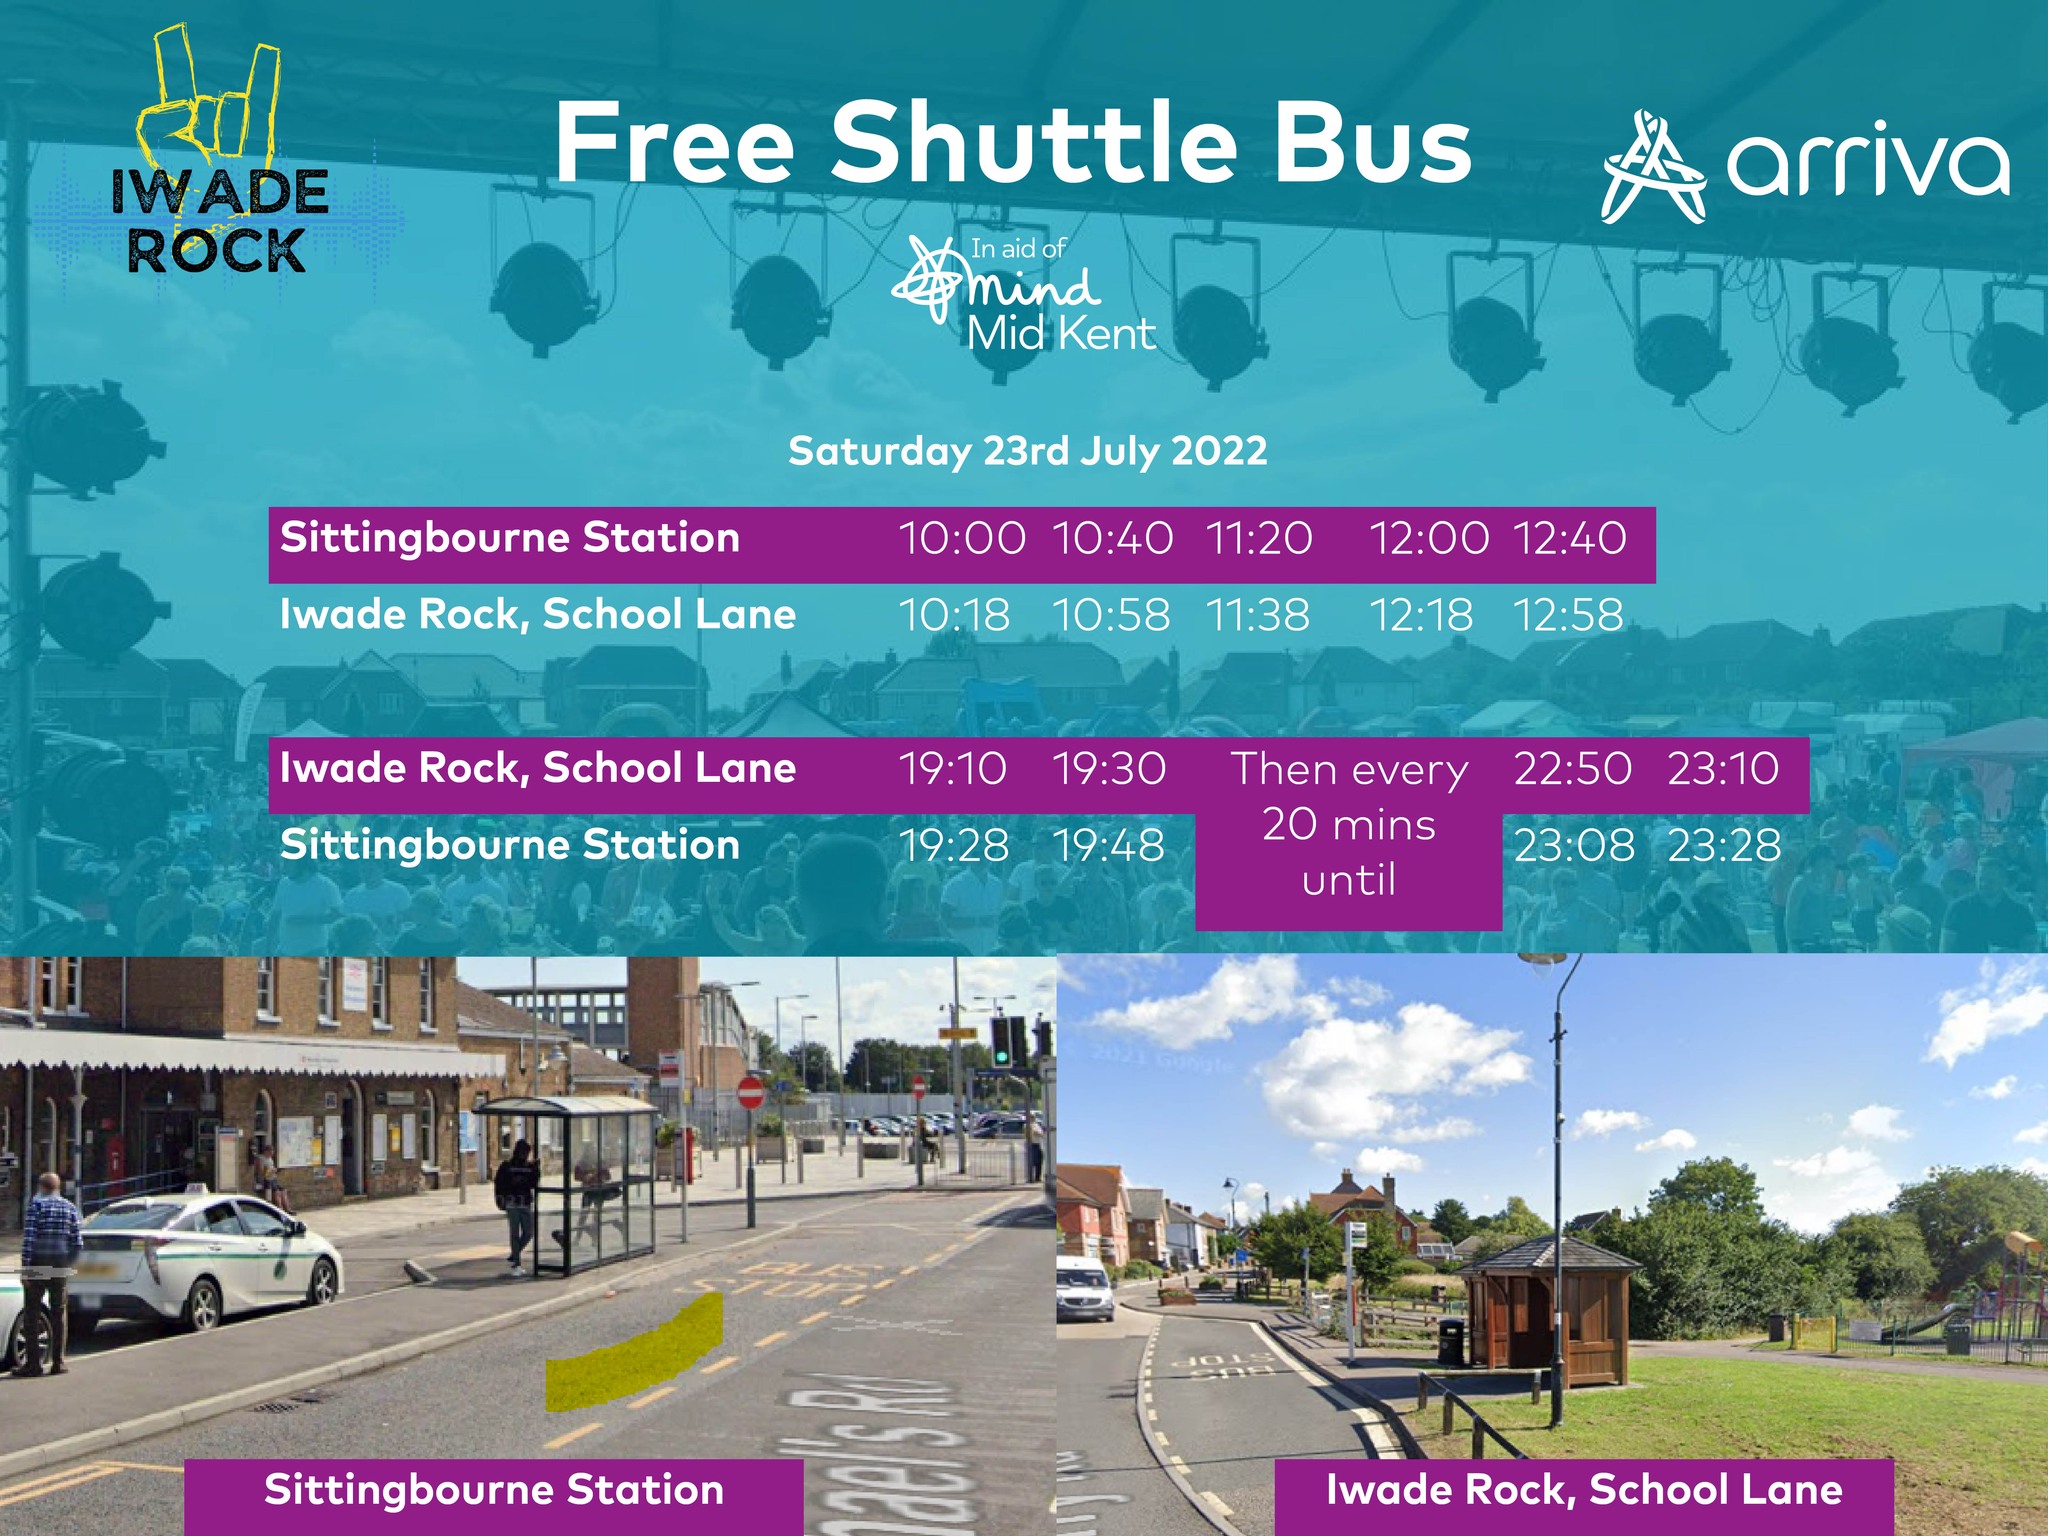 Iwade Rock, Arriva and Mid Kent Mind - FREE Shuttle Bus. Saturday 23rd July 2022. Sittingbourne Station - 10am, arriving 10:18. 10:40am, arriving 10:58am. 11:20am, arriving 11:38am. 12 noon, arriving 12:18pm. 12:40pm, arriving 12:58pm. Departing Iwade Rock - 19:10pm, arriving at the station at 19:28pm. 19:30pm, arriving at 19:48pm. Then every 20 minutes until 22:50pm to 23:08pm, and 23:10pm till 23:28pm. 